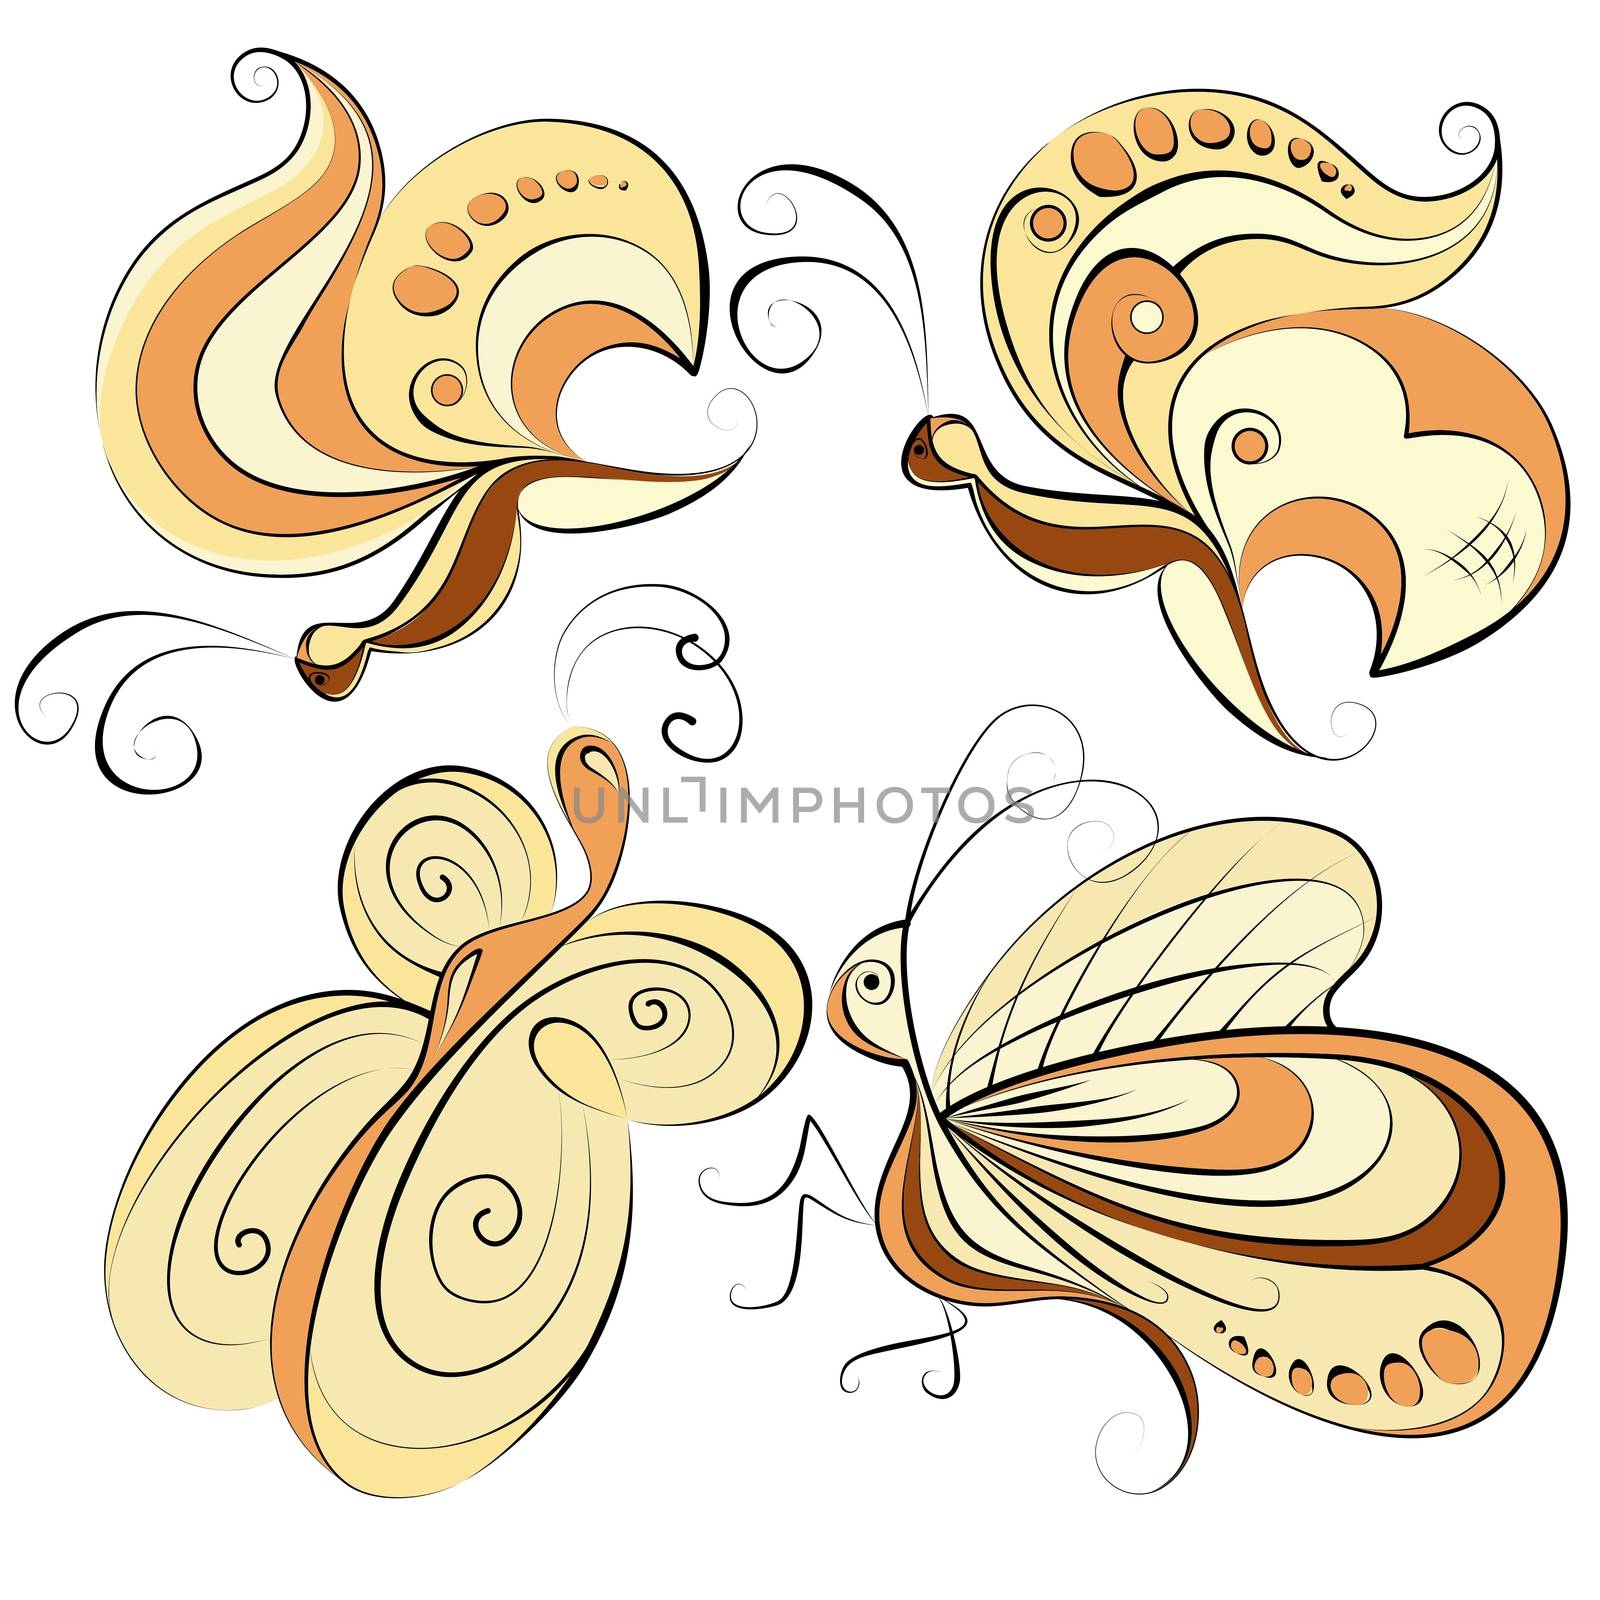 Illustration - four different butterflies on a white background by Madhourse